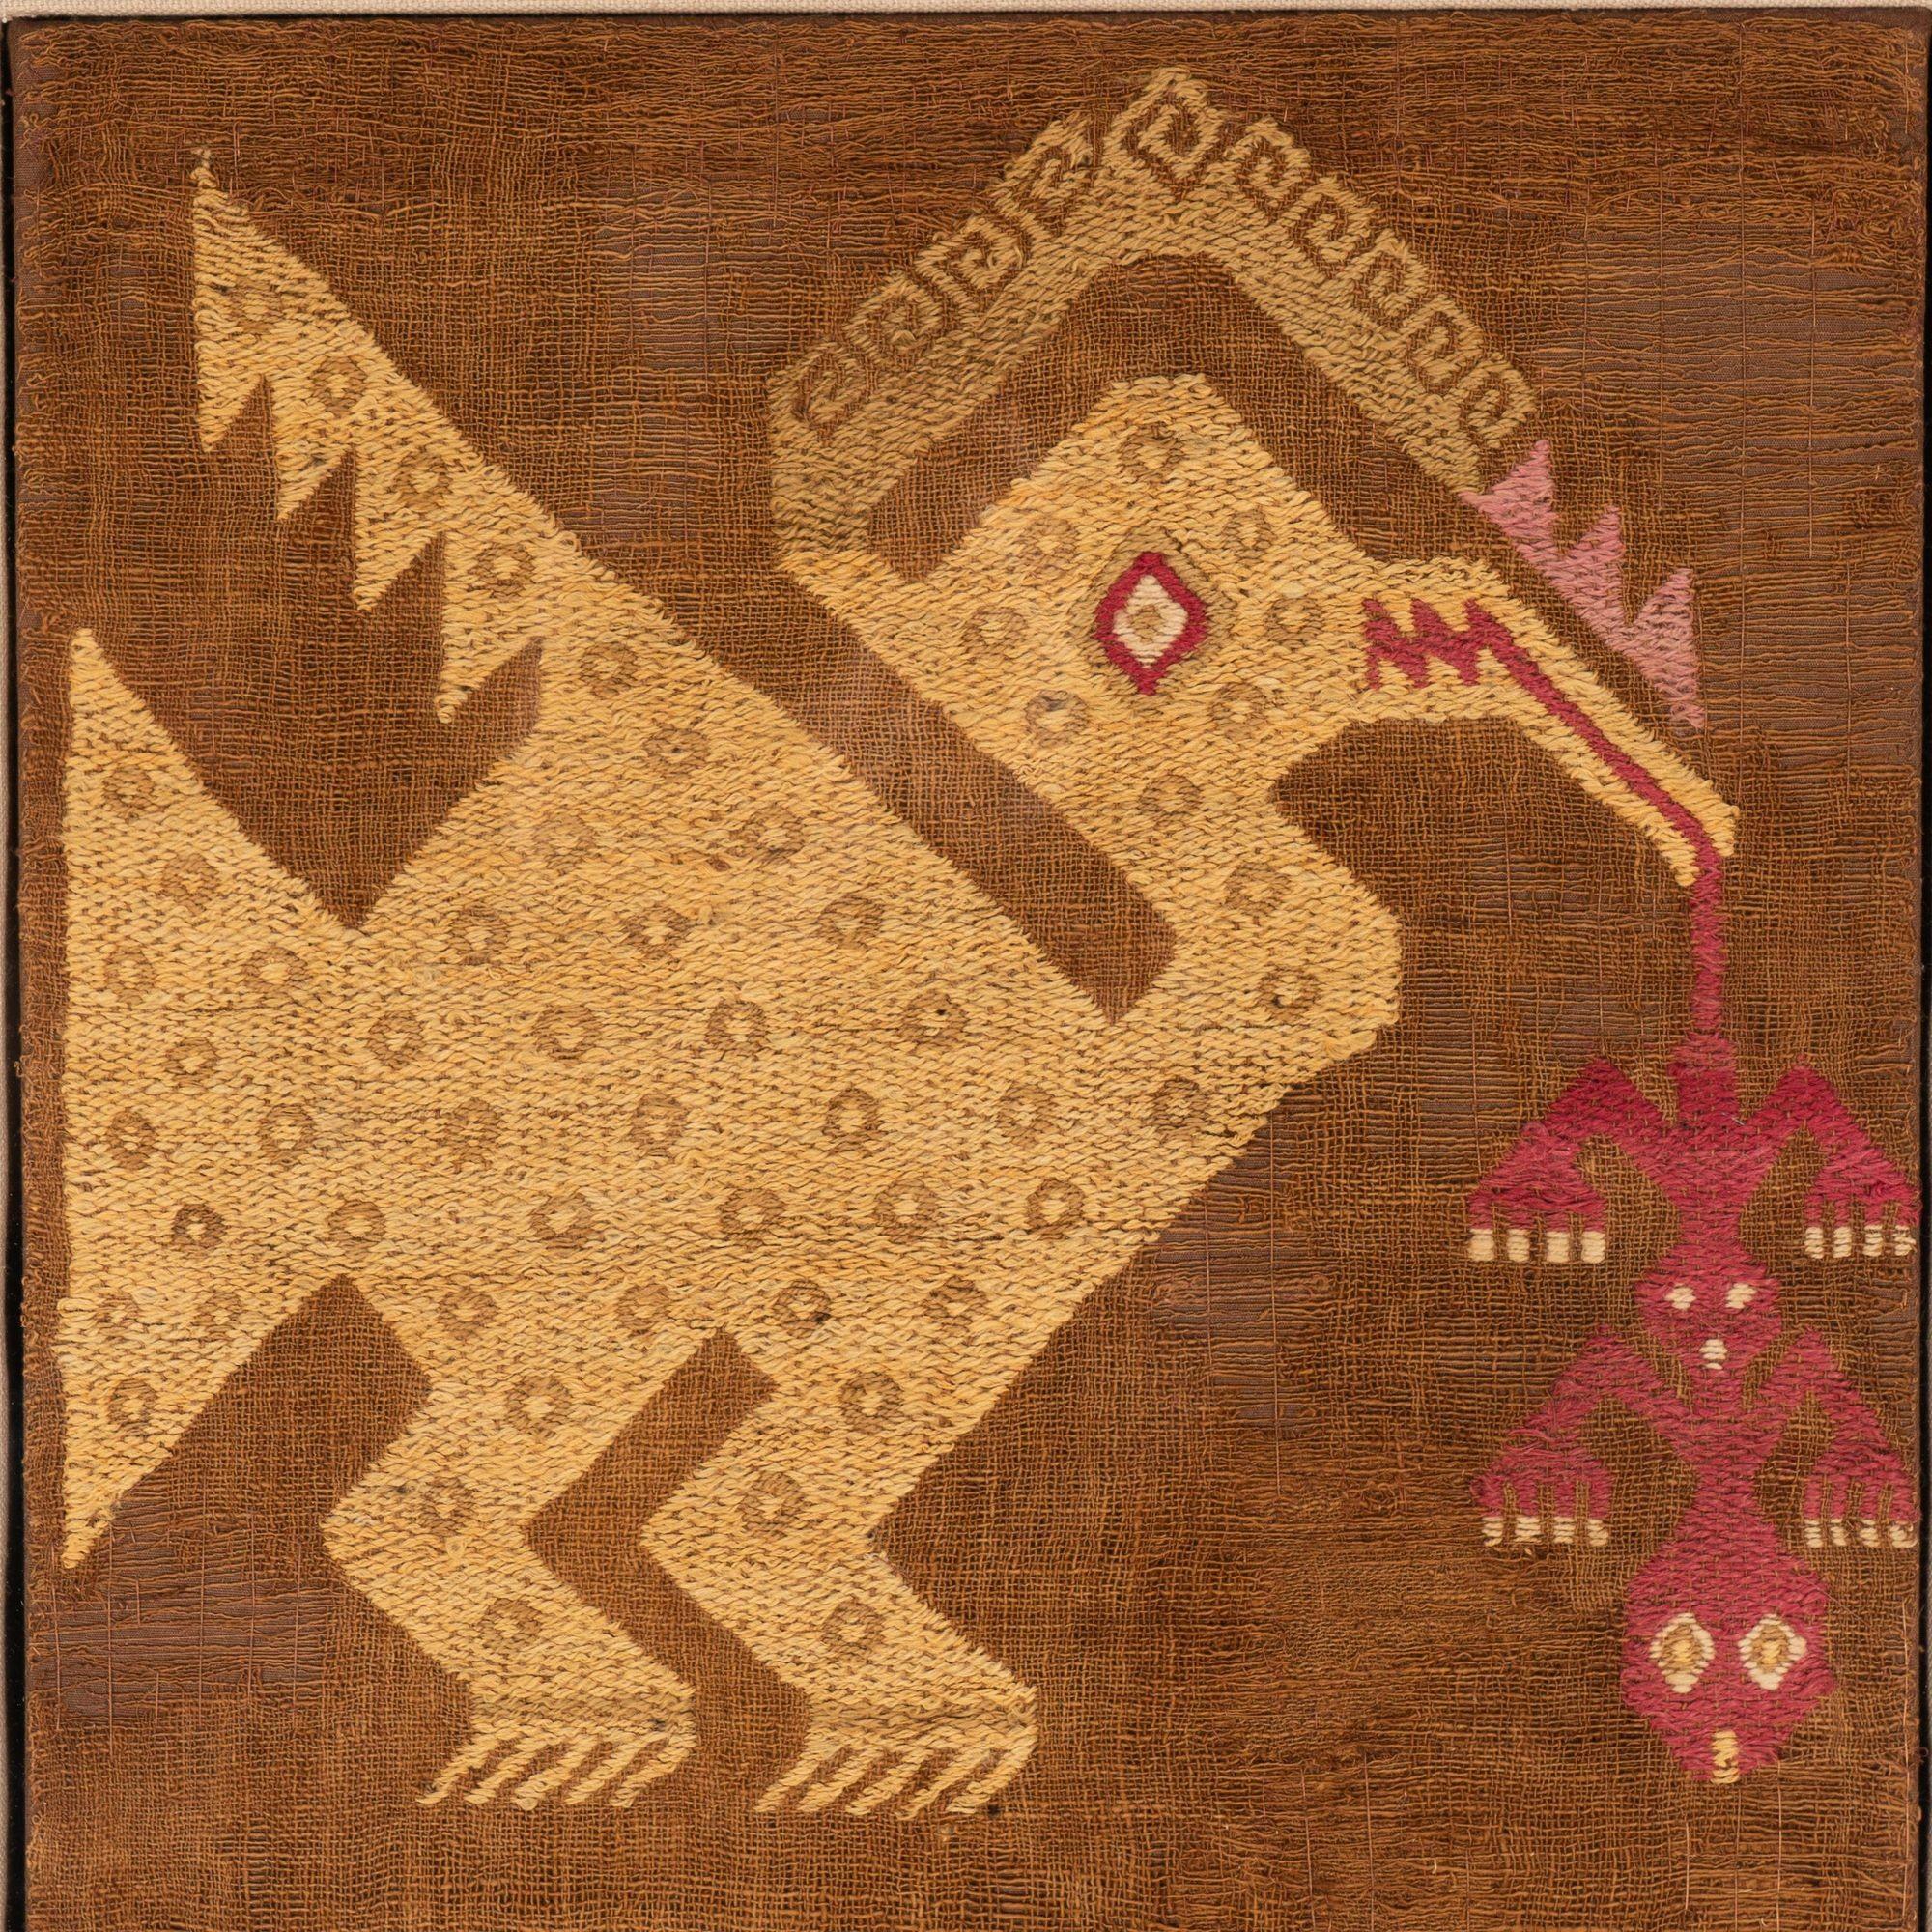 Peruvian Pre-Colombian (Chancay) textile panel of camelid wool embroidered on cotton with three birds, each holding a lizard in its beak.
